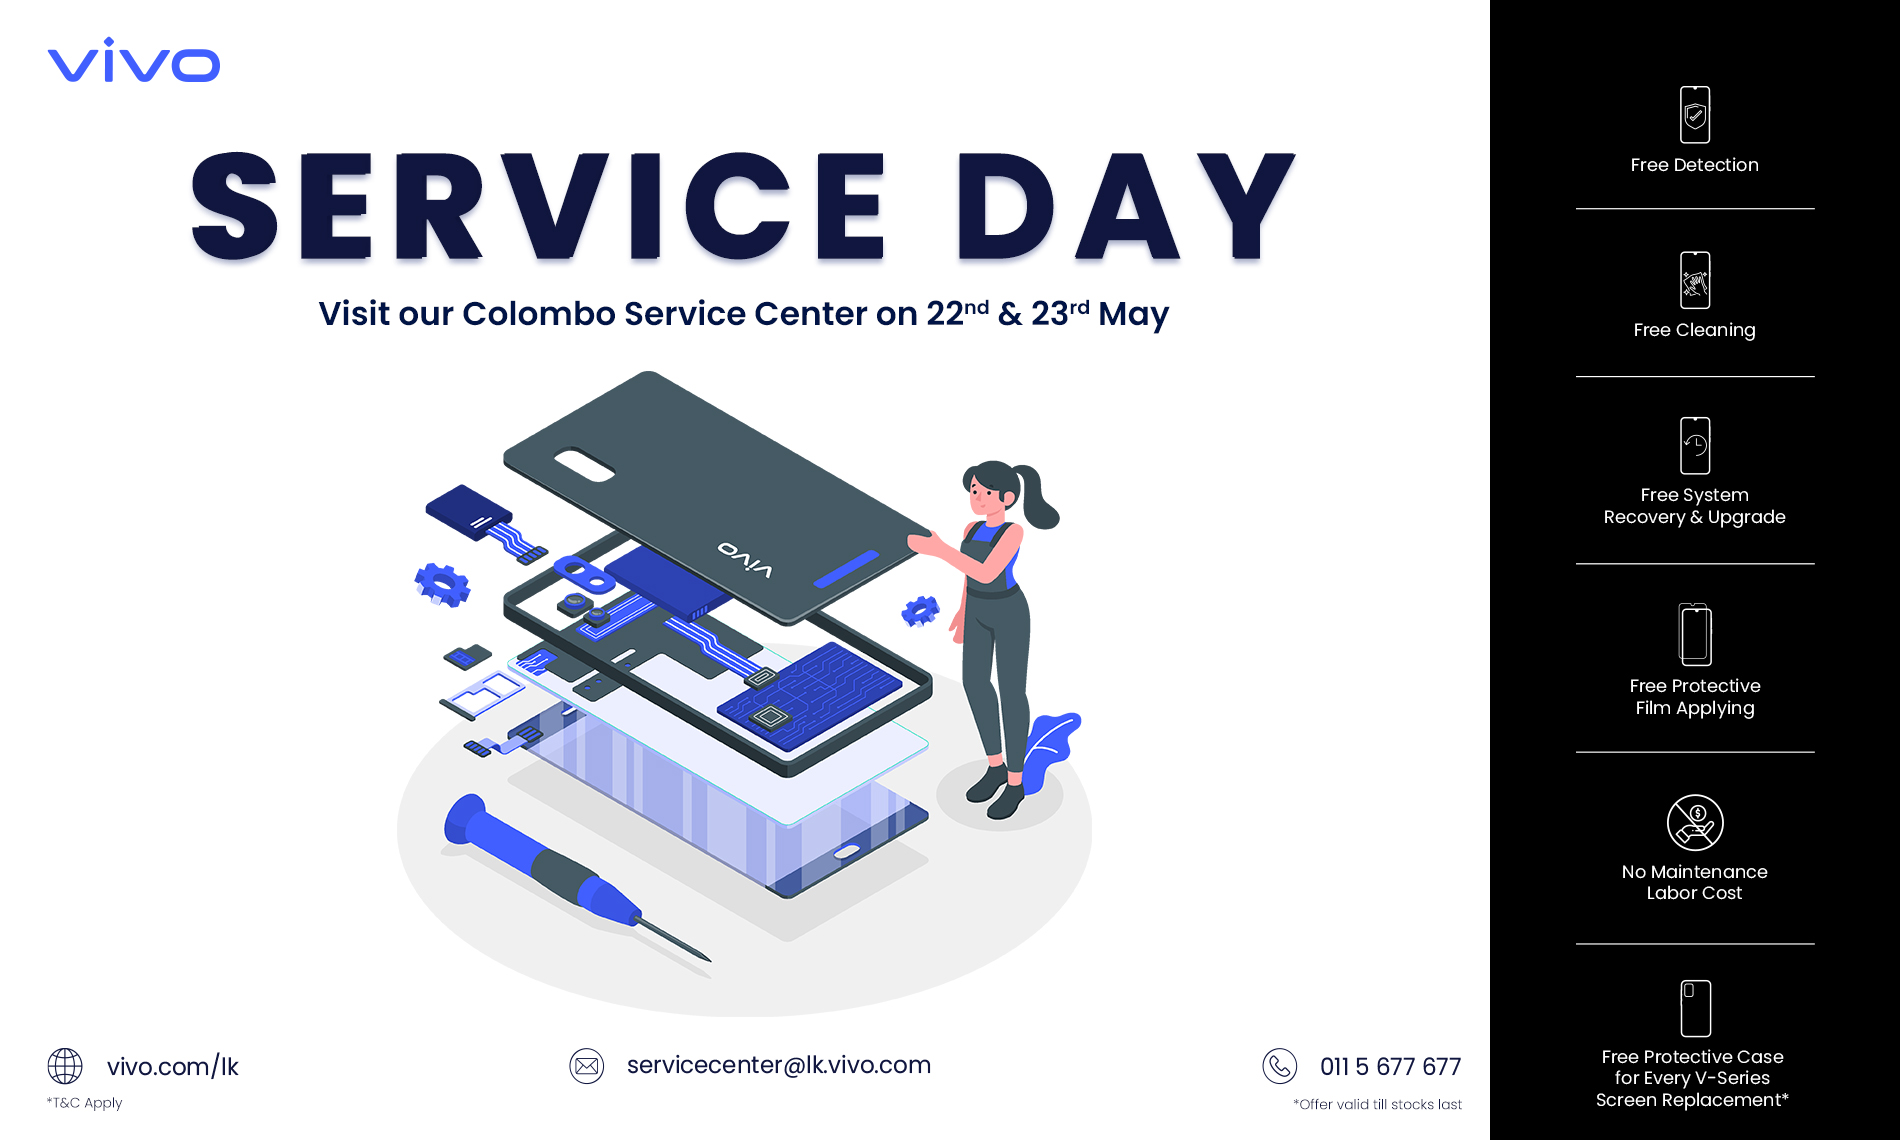 vivo Service Day Benefits in May